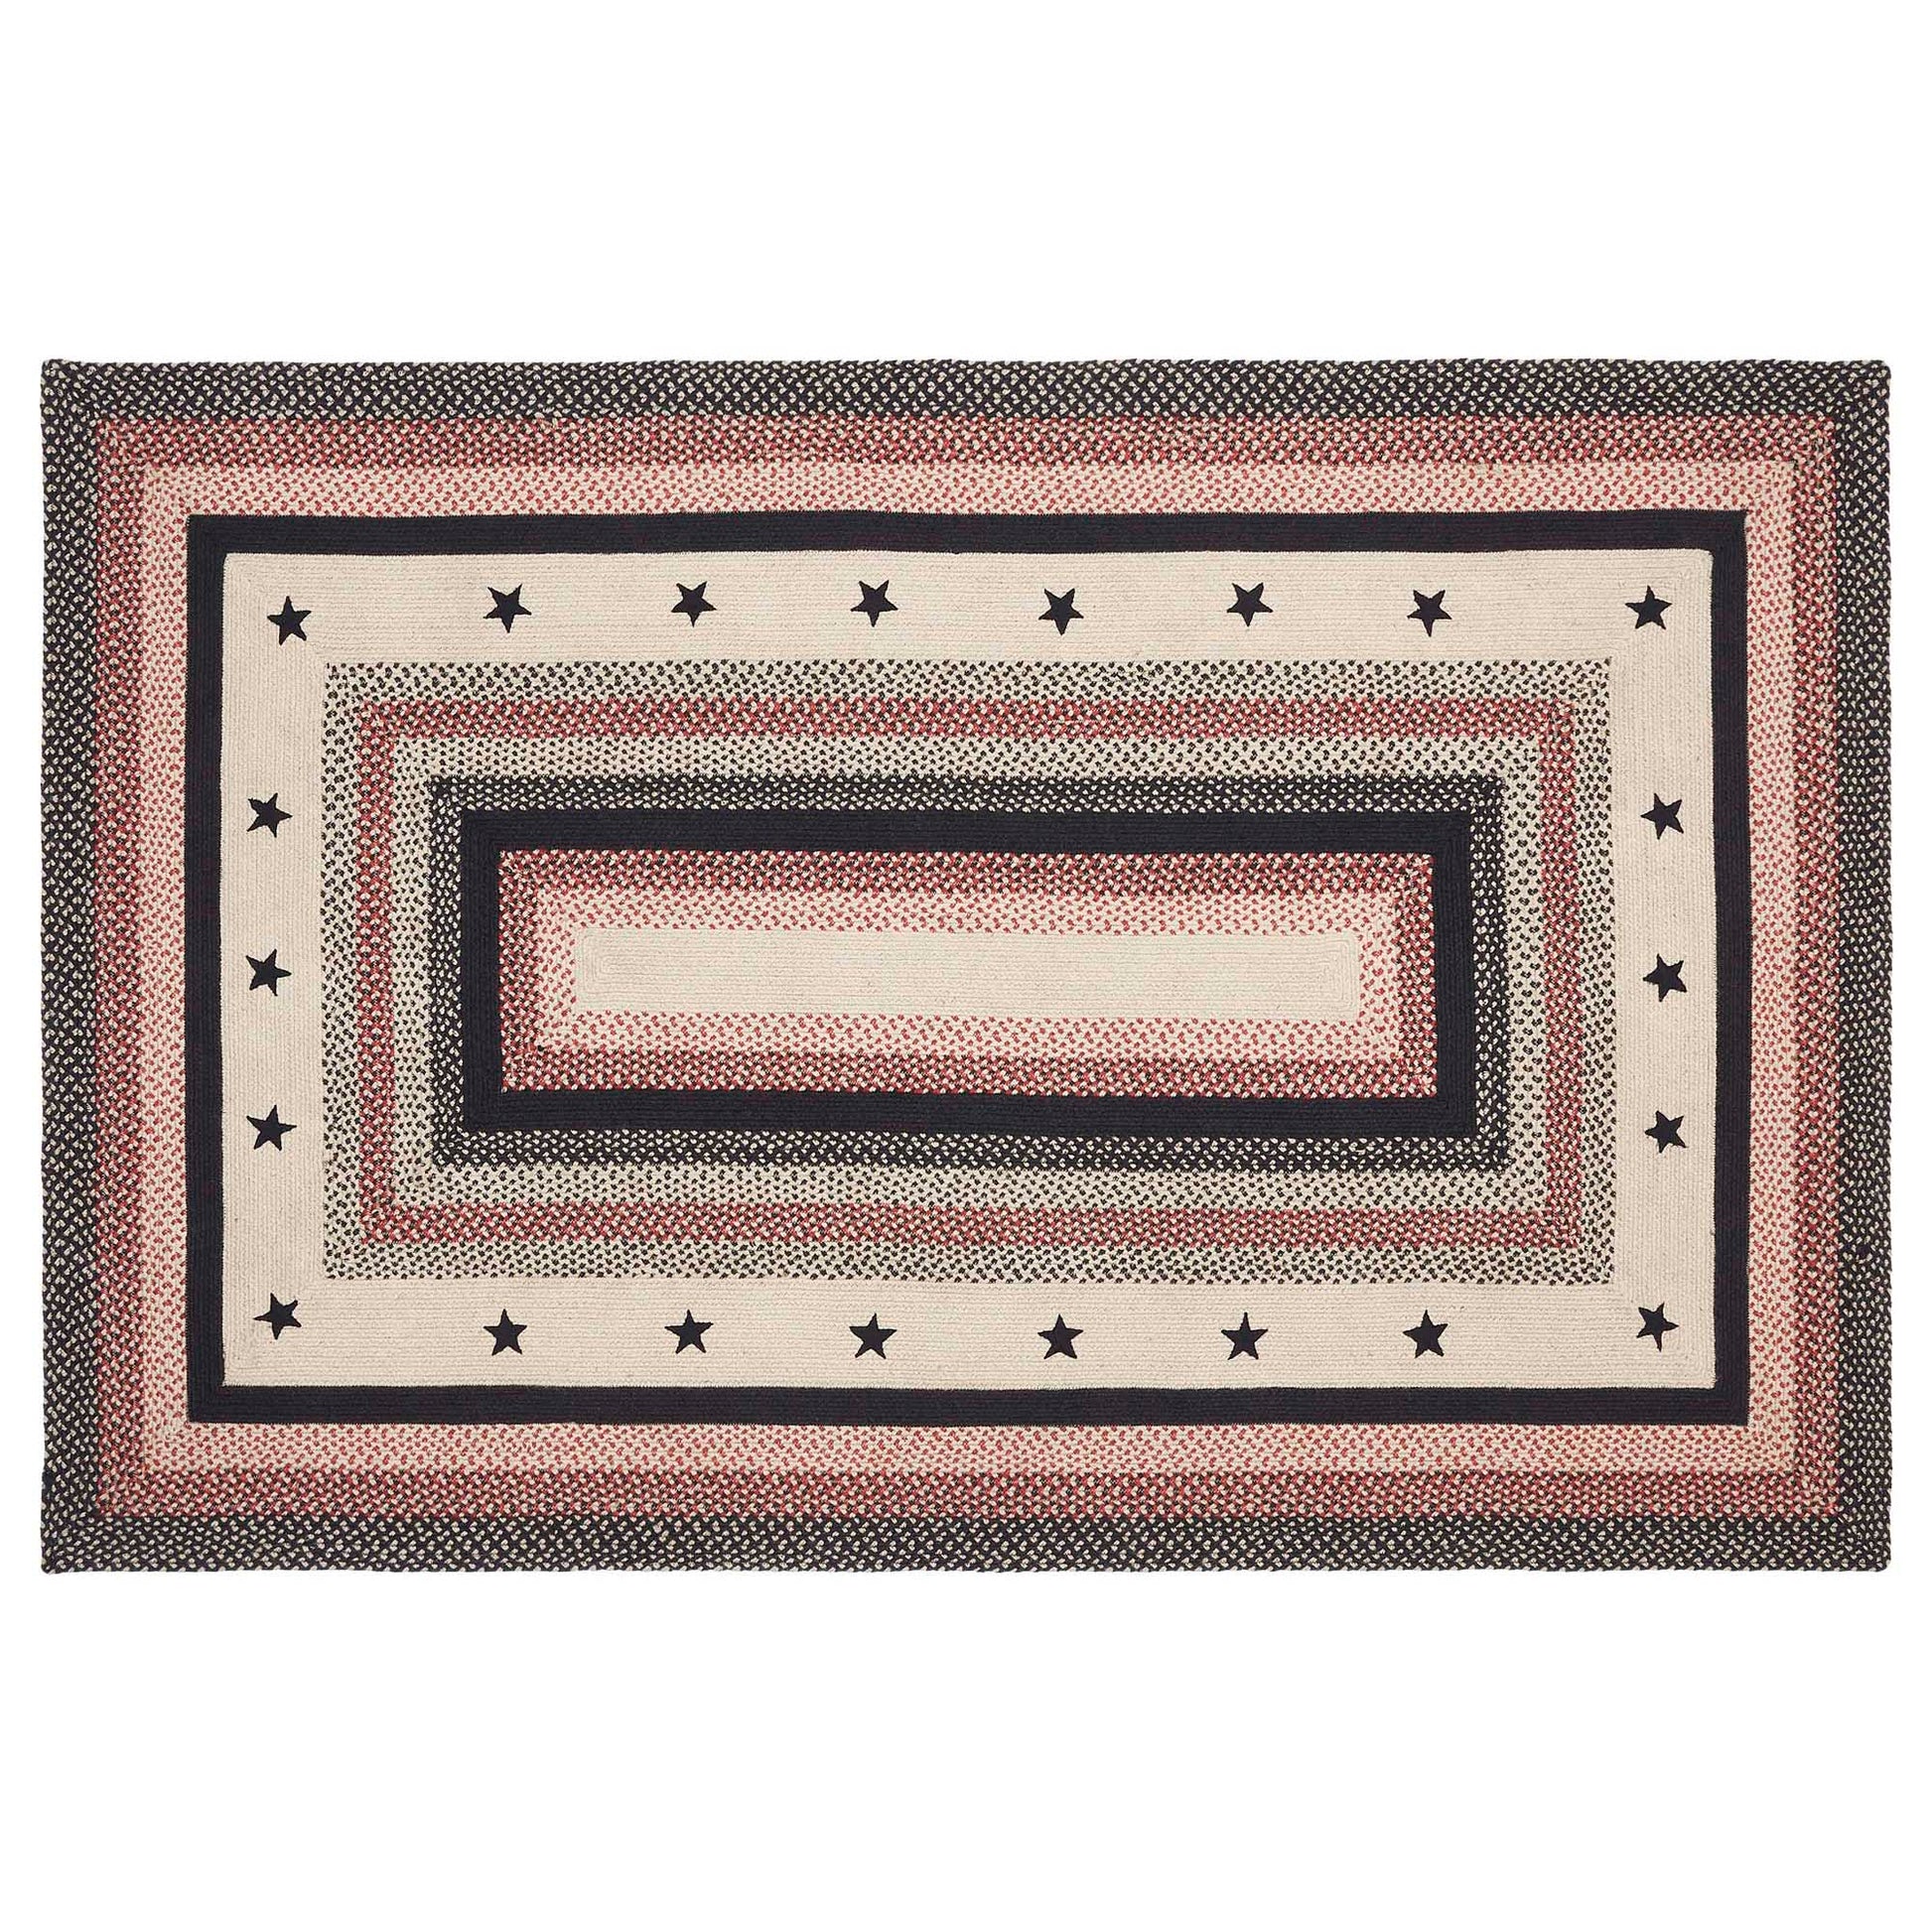 67016-Colonial-Star-Jute-Rug-Rect-w-Pad-60x96-image-2